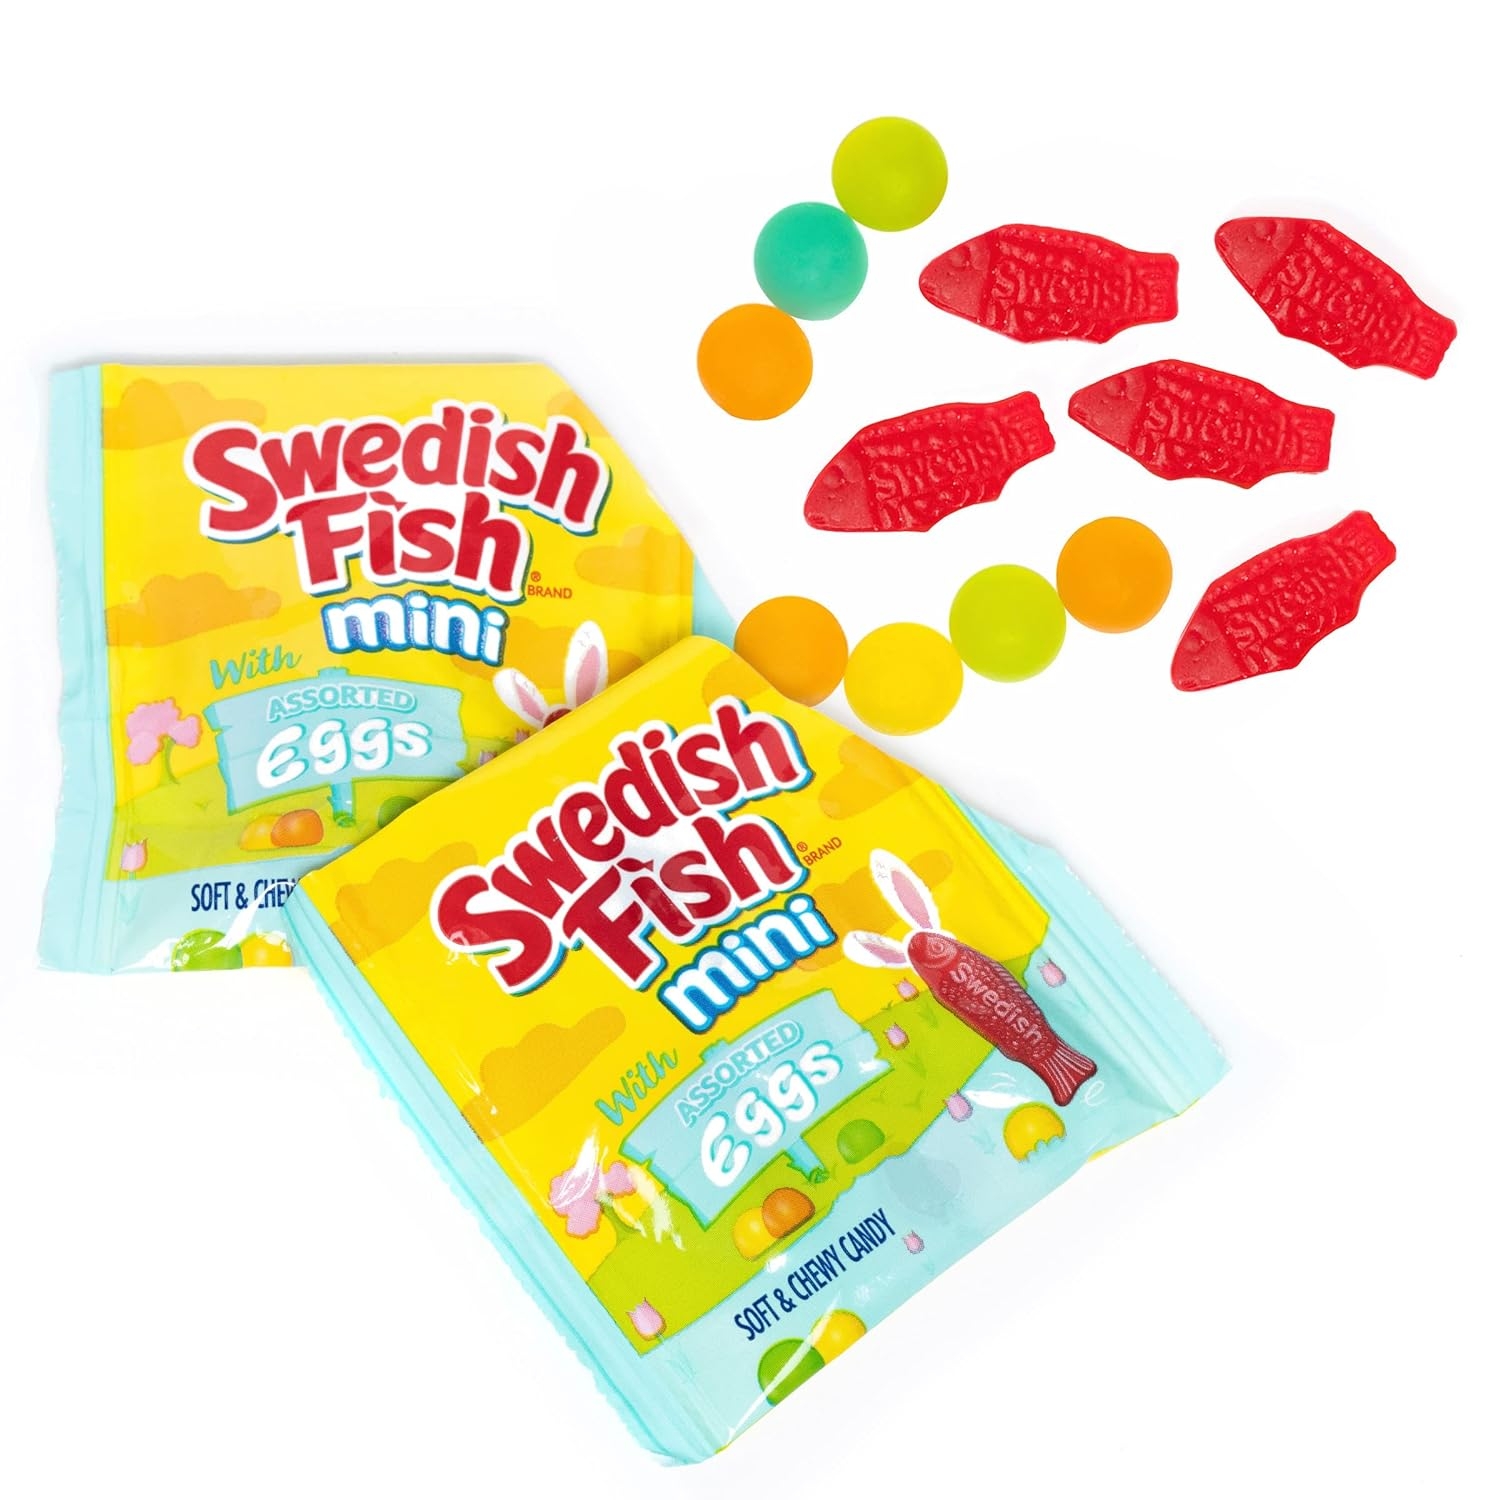 SWEDISH FISH Mini with Assorted Eggs Soft & Chewy Easter Candy, 18 Snack Packs